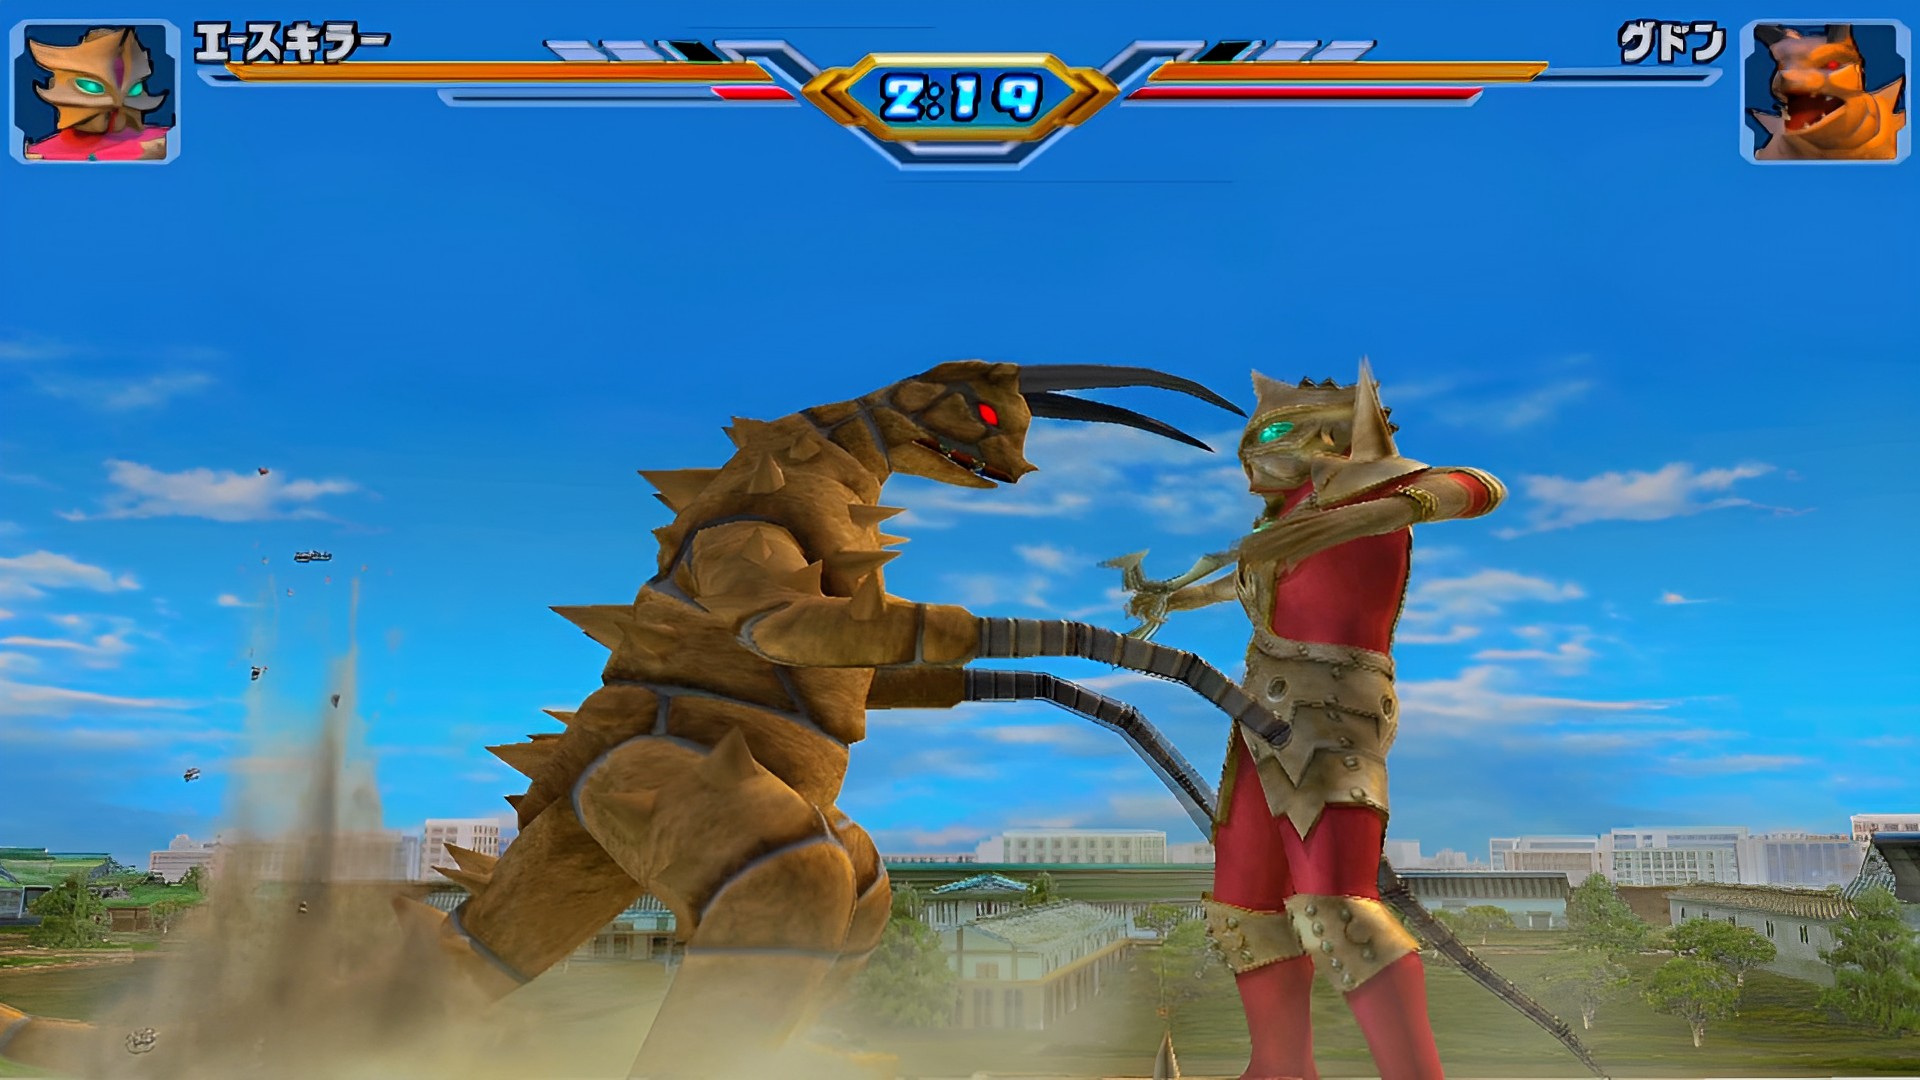 Ultra Legendary Heroes of the game Ultraman_Ultraman's game_Ultraman game collection free in-app purchase cracked version